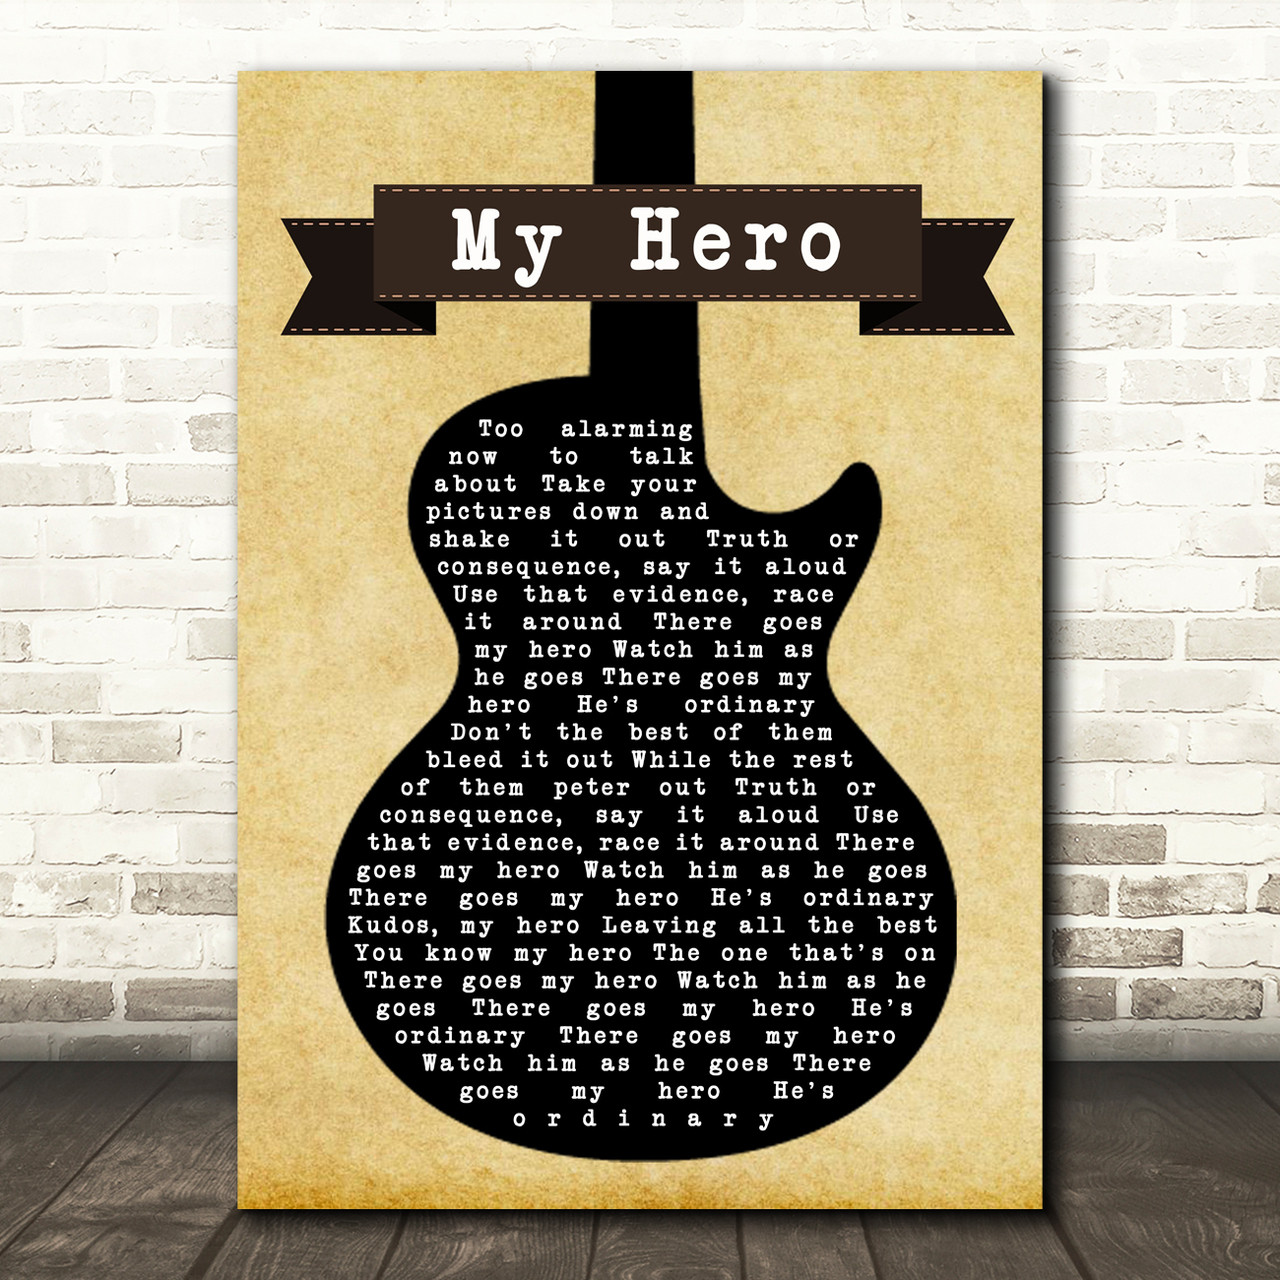 the meaning behind the lyrics of Foo Fighters - My Hero #foofighters #, Foo  Fighters